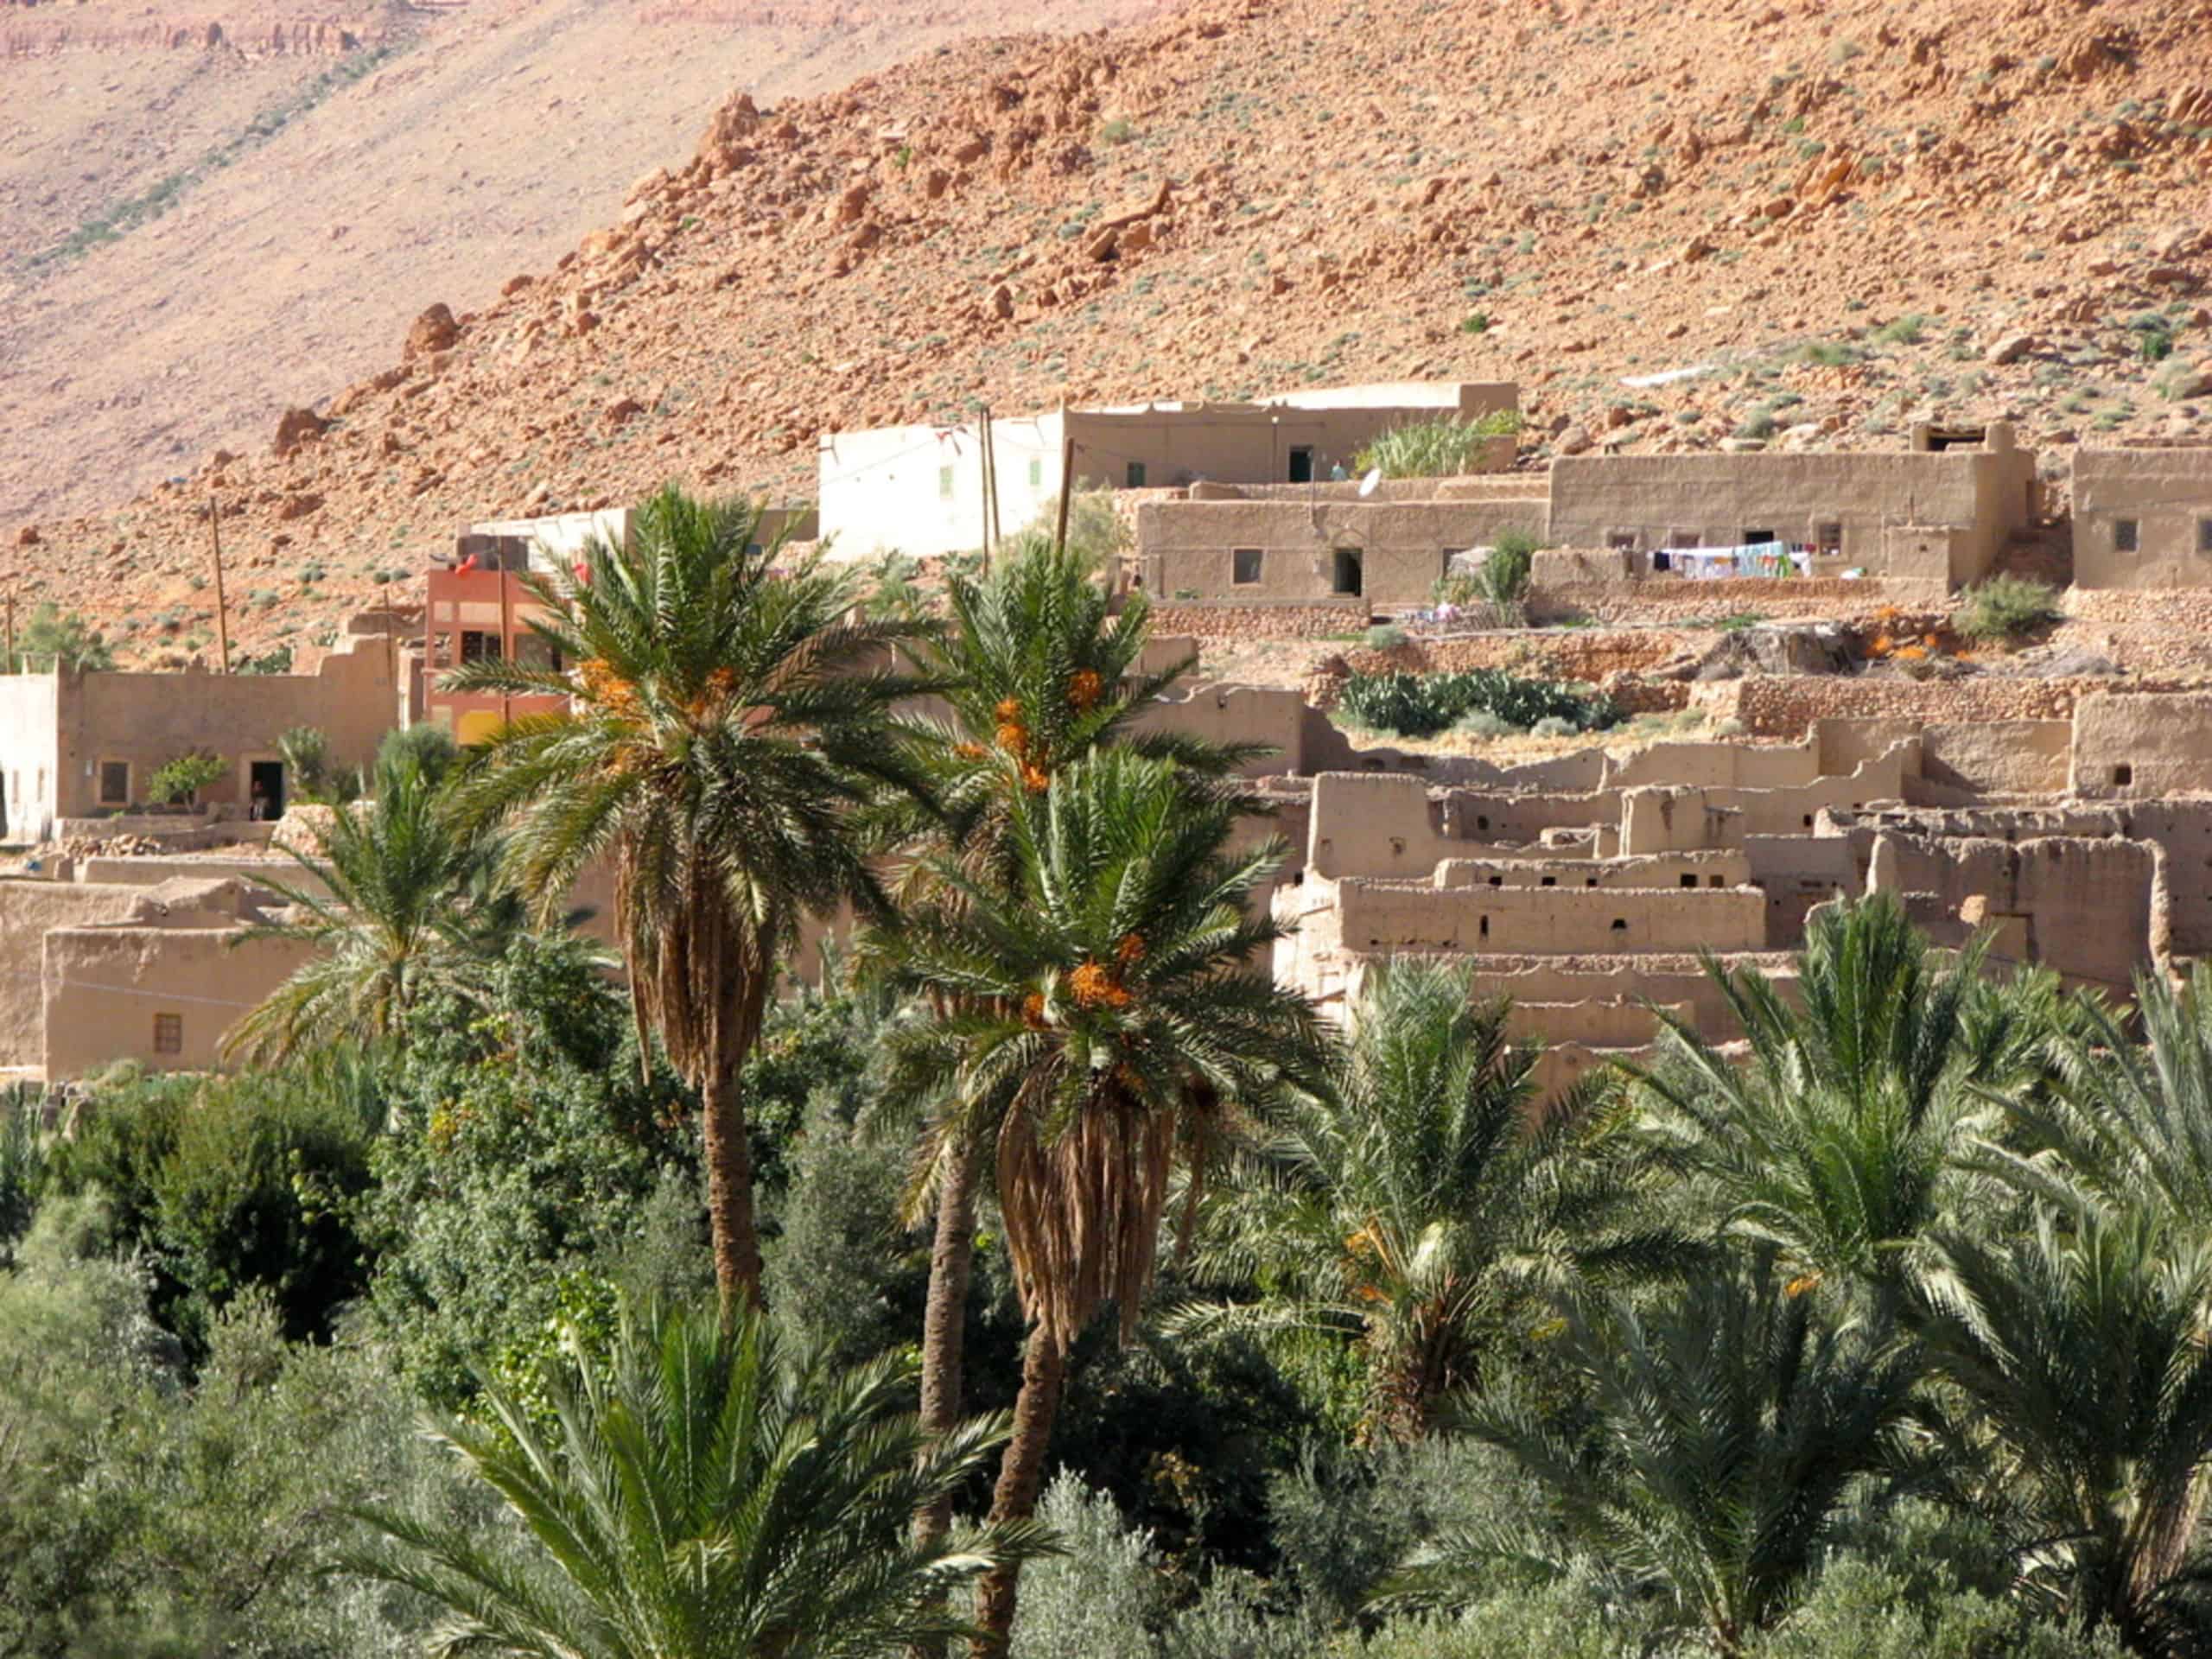 Morocco's Dades and the Draa Valley